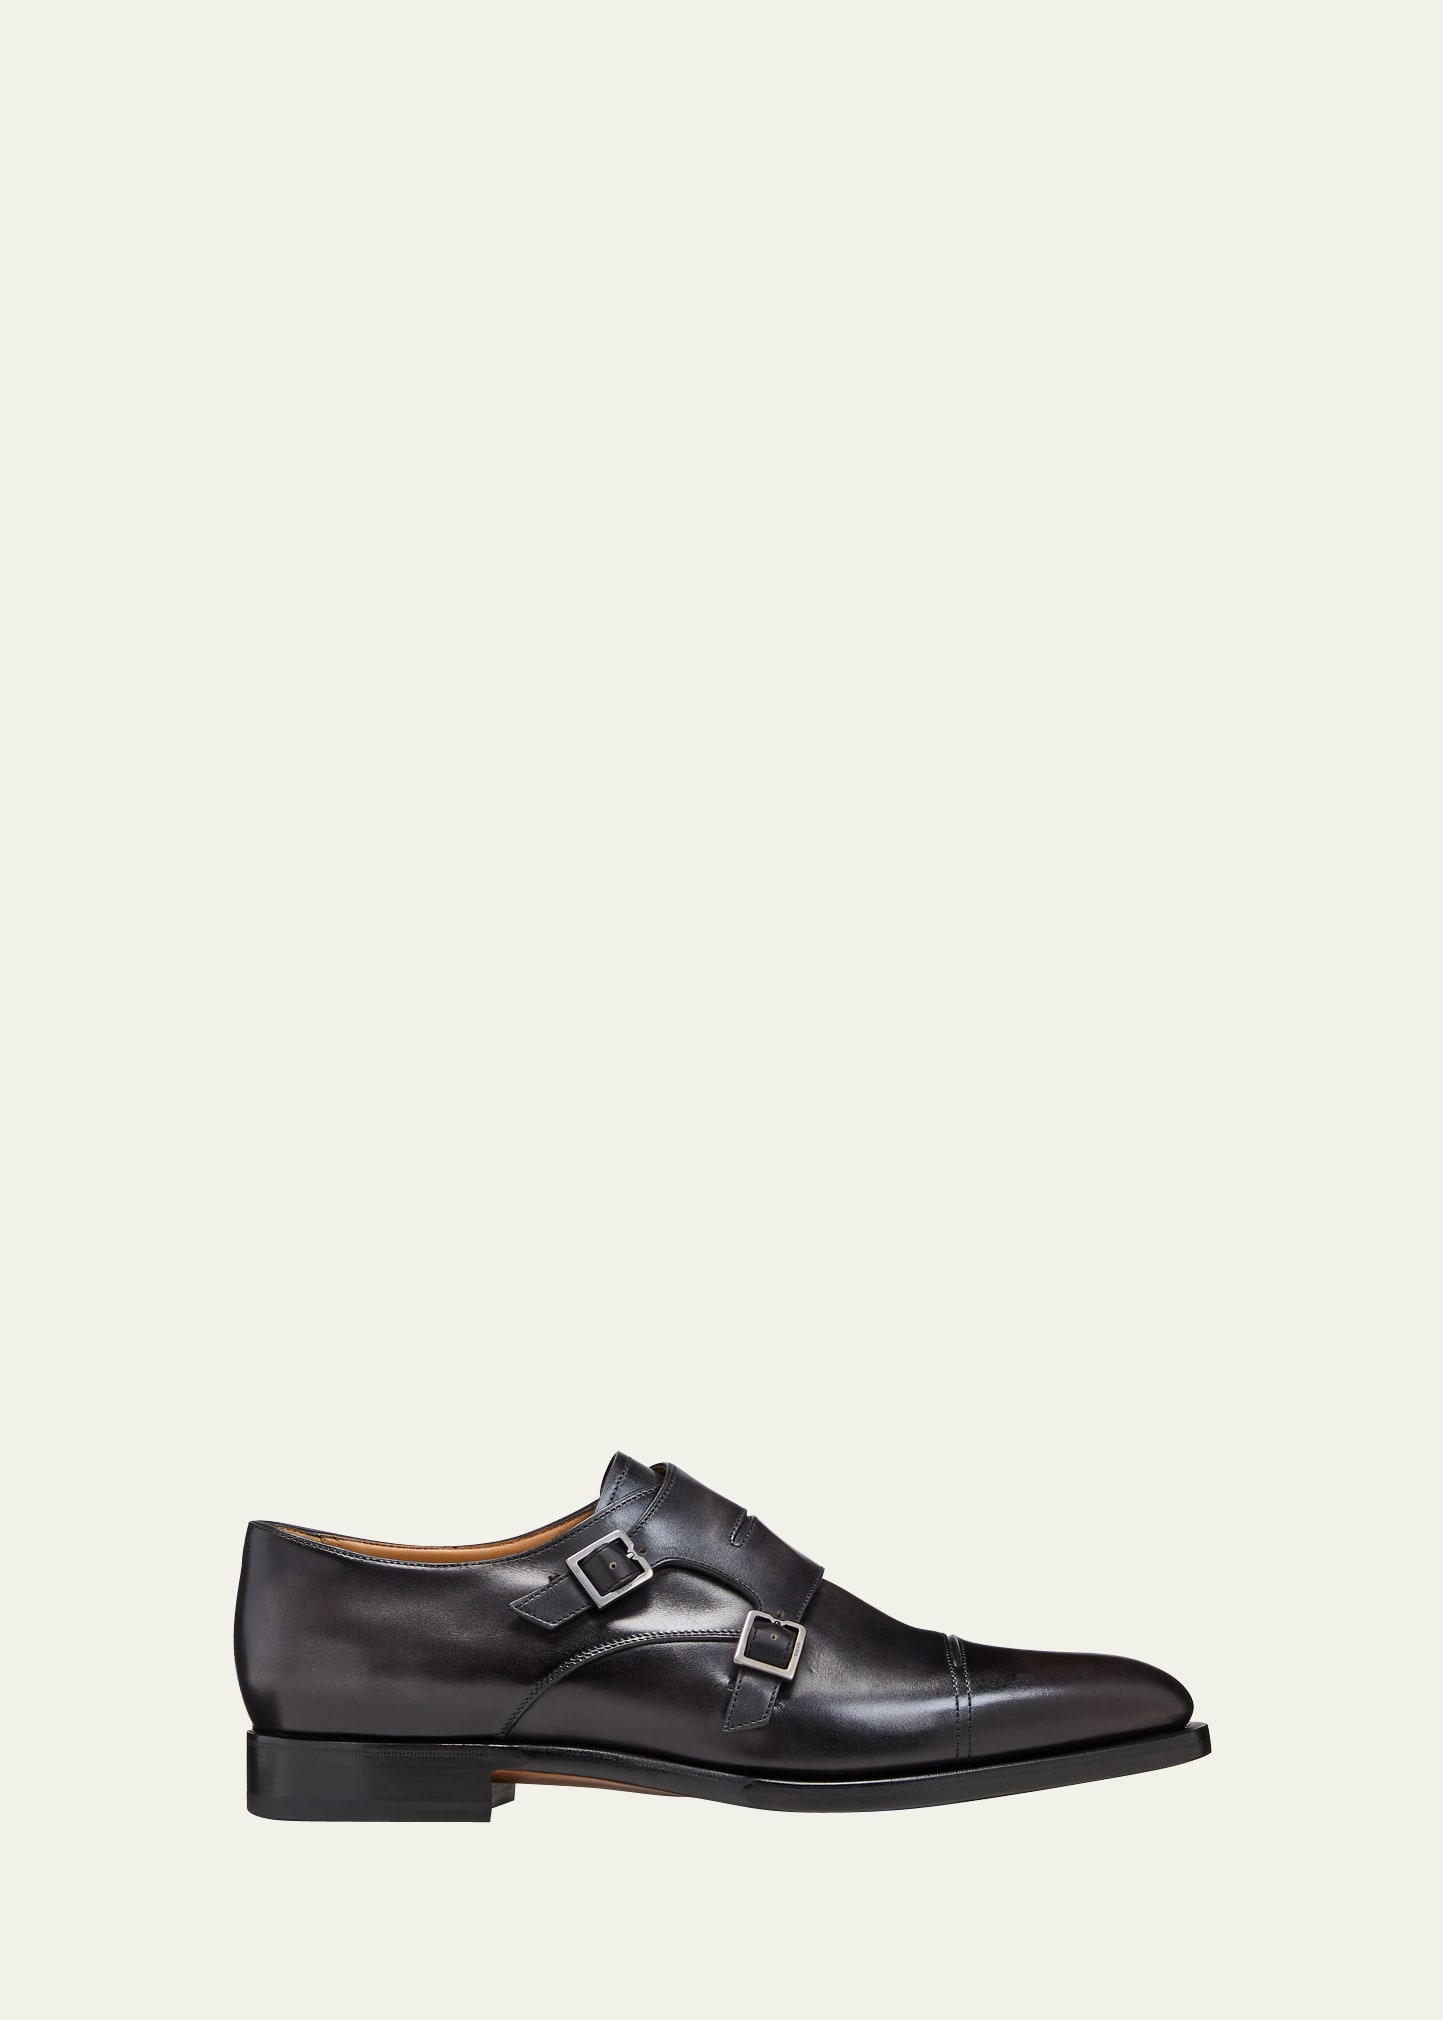 Men's Equilibre Leather Double Monk Strap Loafers